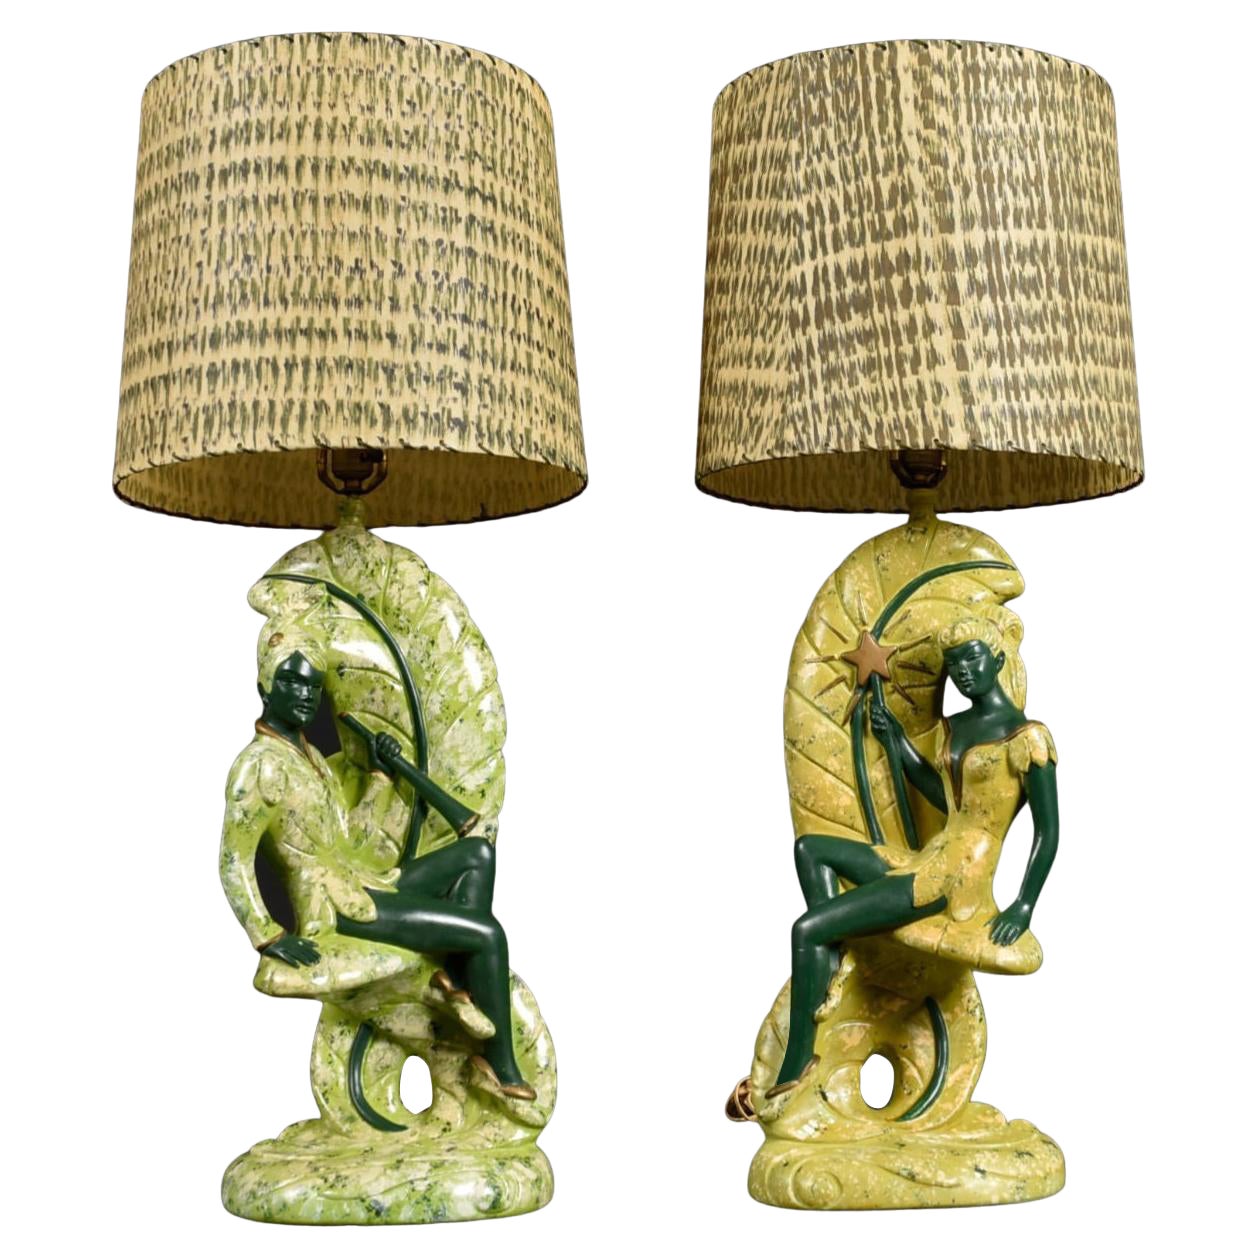 Continental Art Co. Green Fairy Chalkware Lamps with Fiberglass Shades For Sale